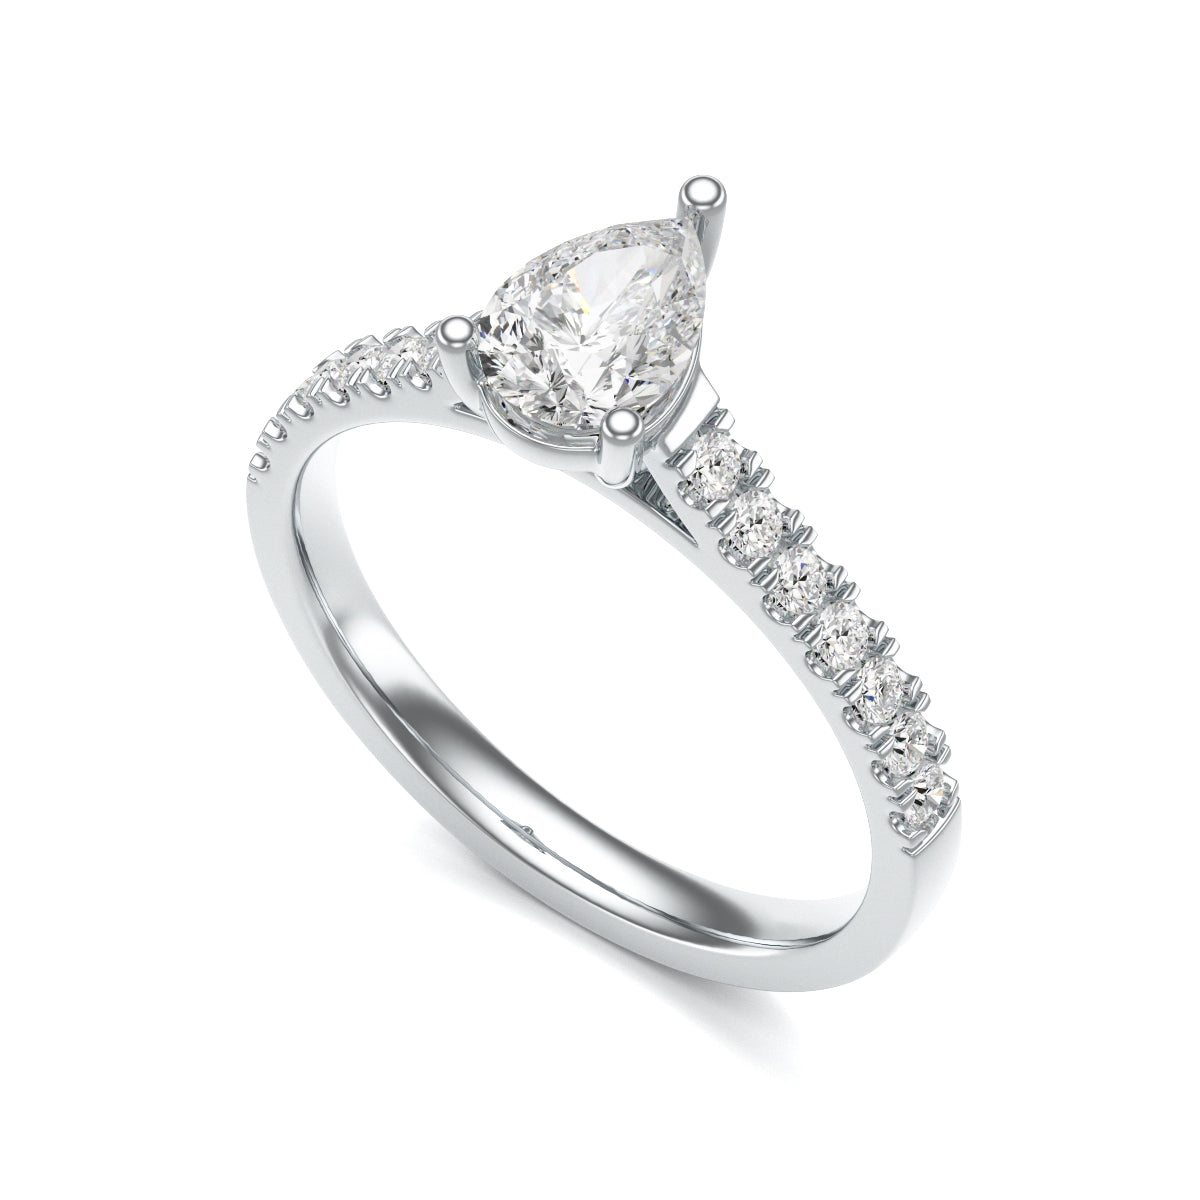 Diamond Engagement Ring- Pear Shaped Solitaire With Diamond Set Shoulders